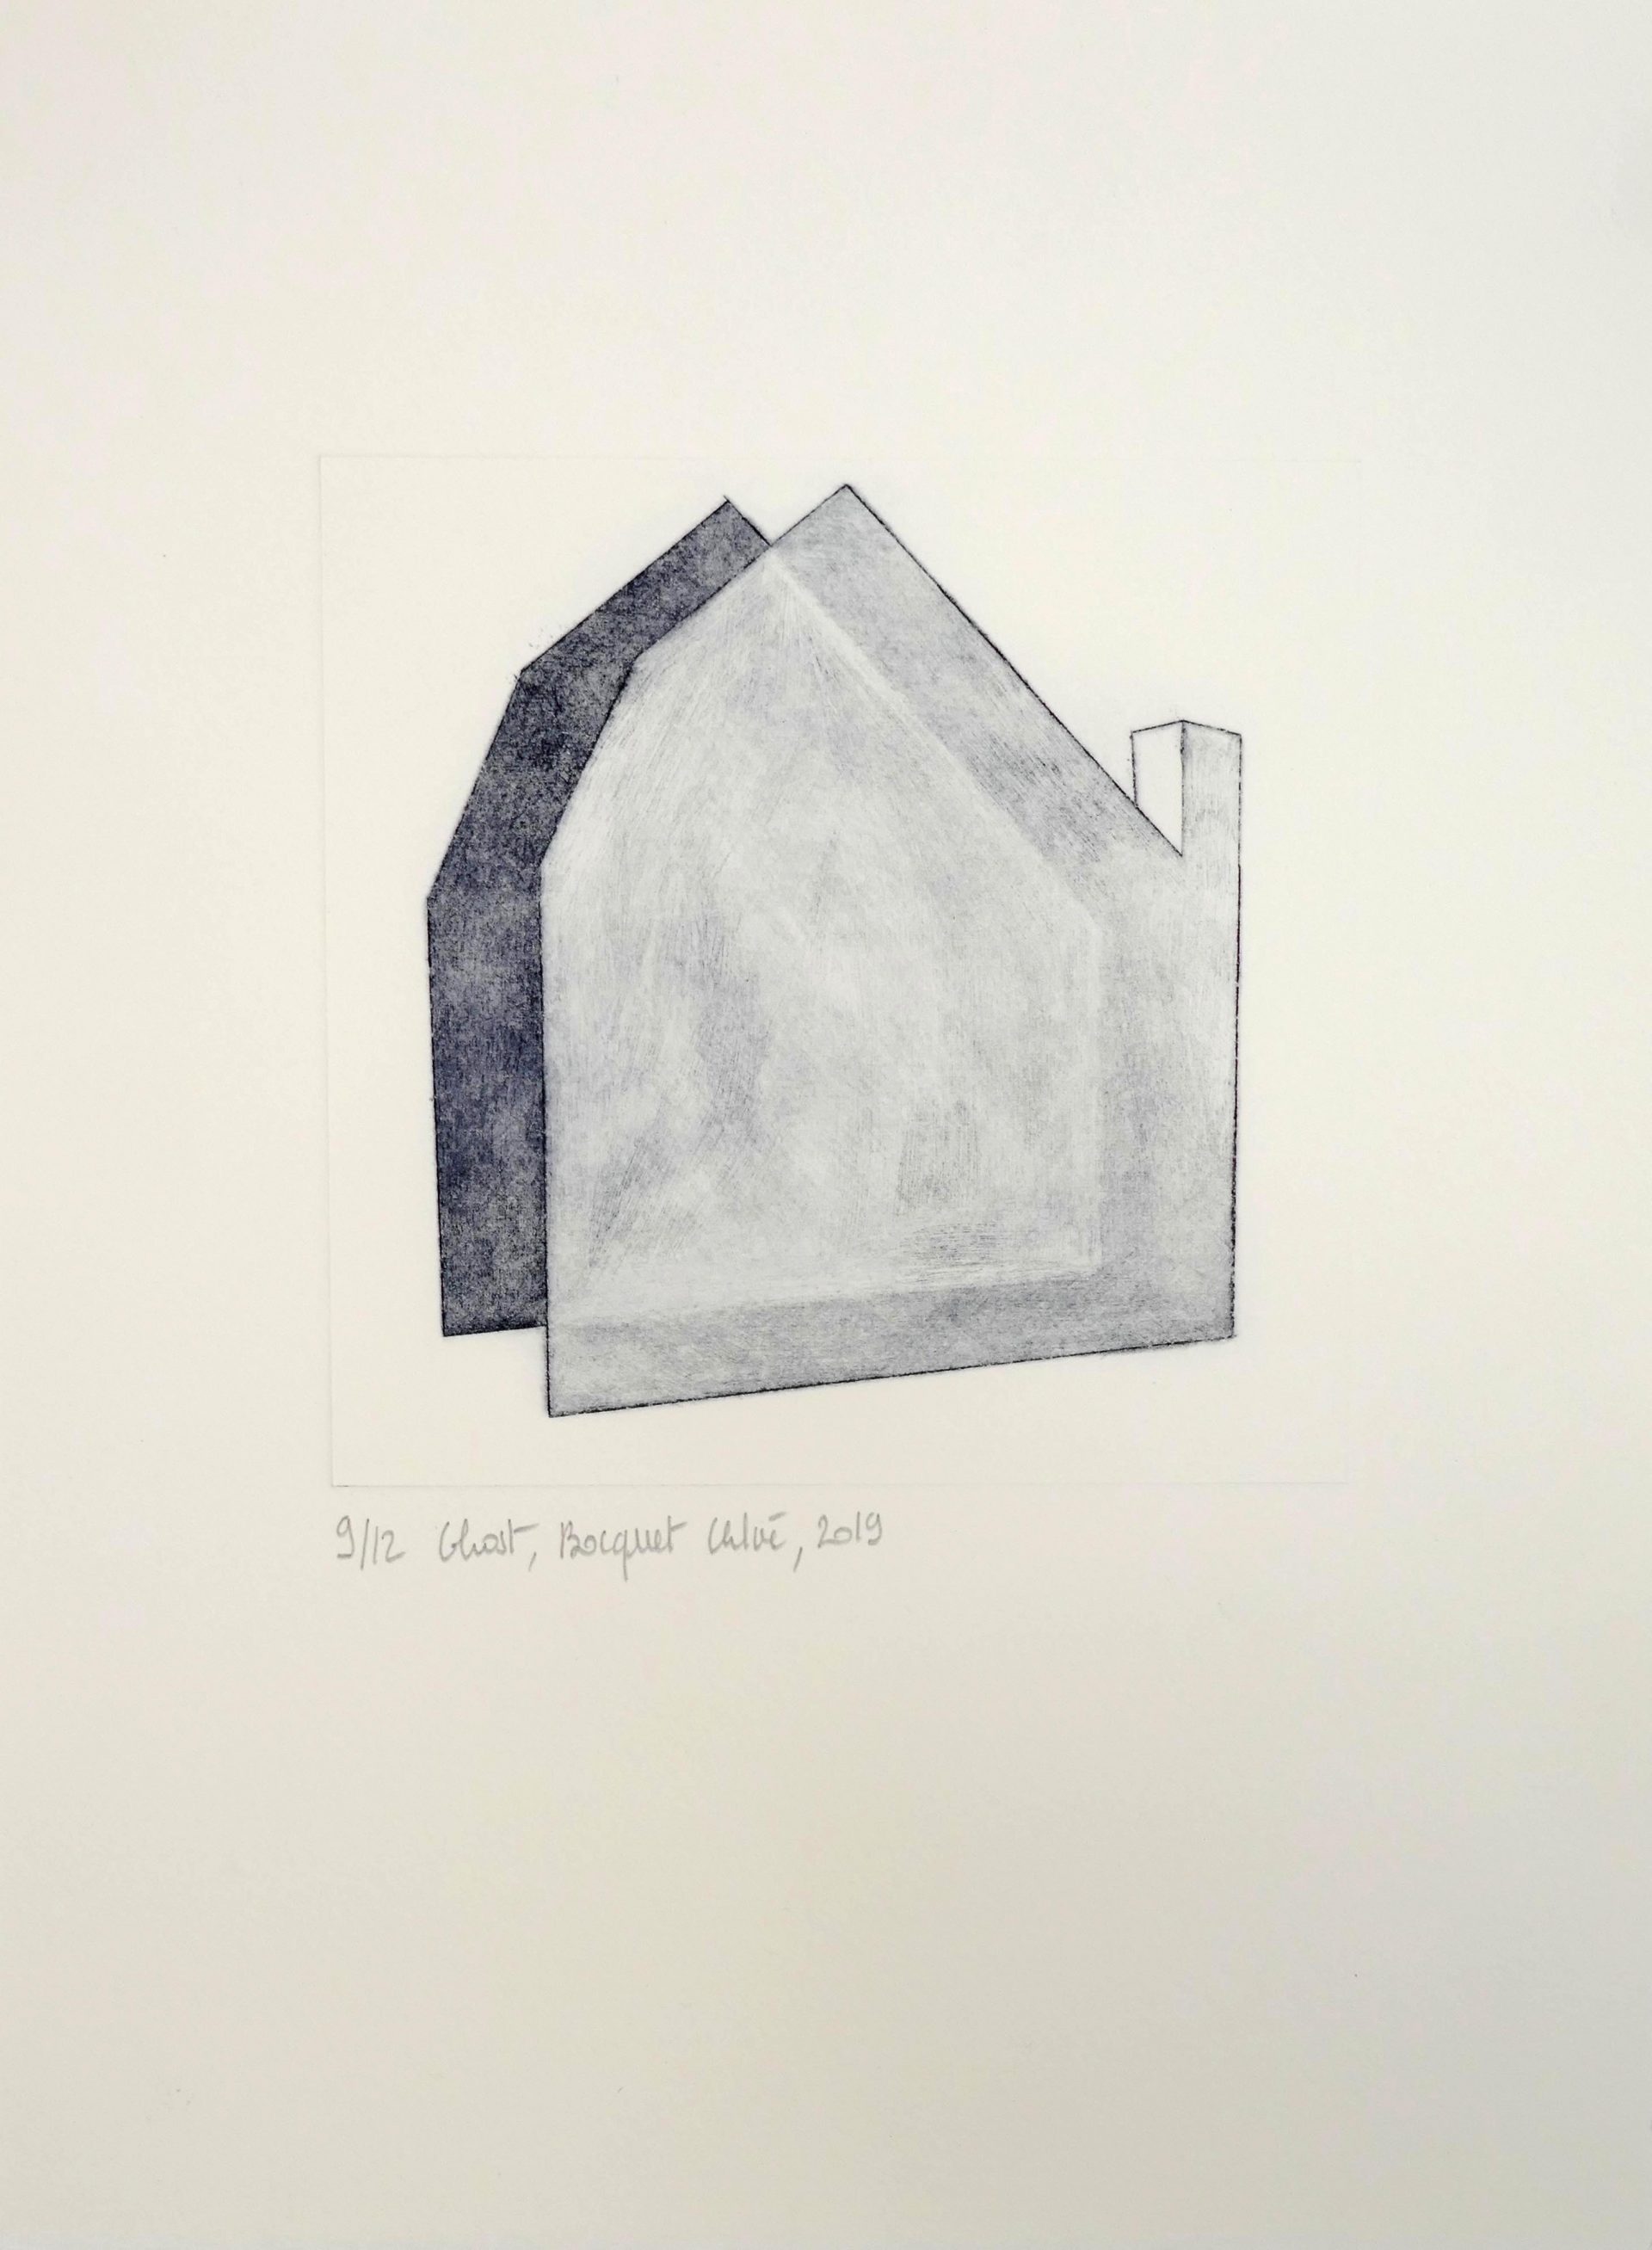 Ghost, 2019, drypoint, image size 15x15, paper size 33x25 cm, edition of 12